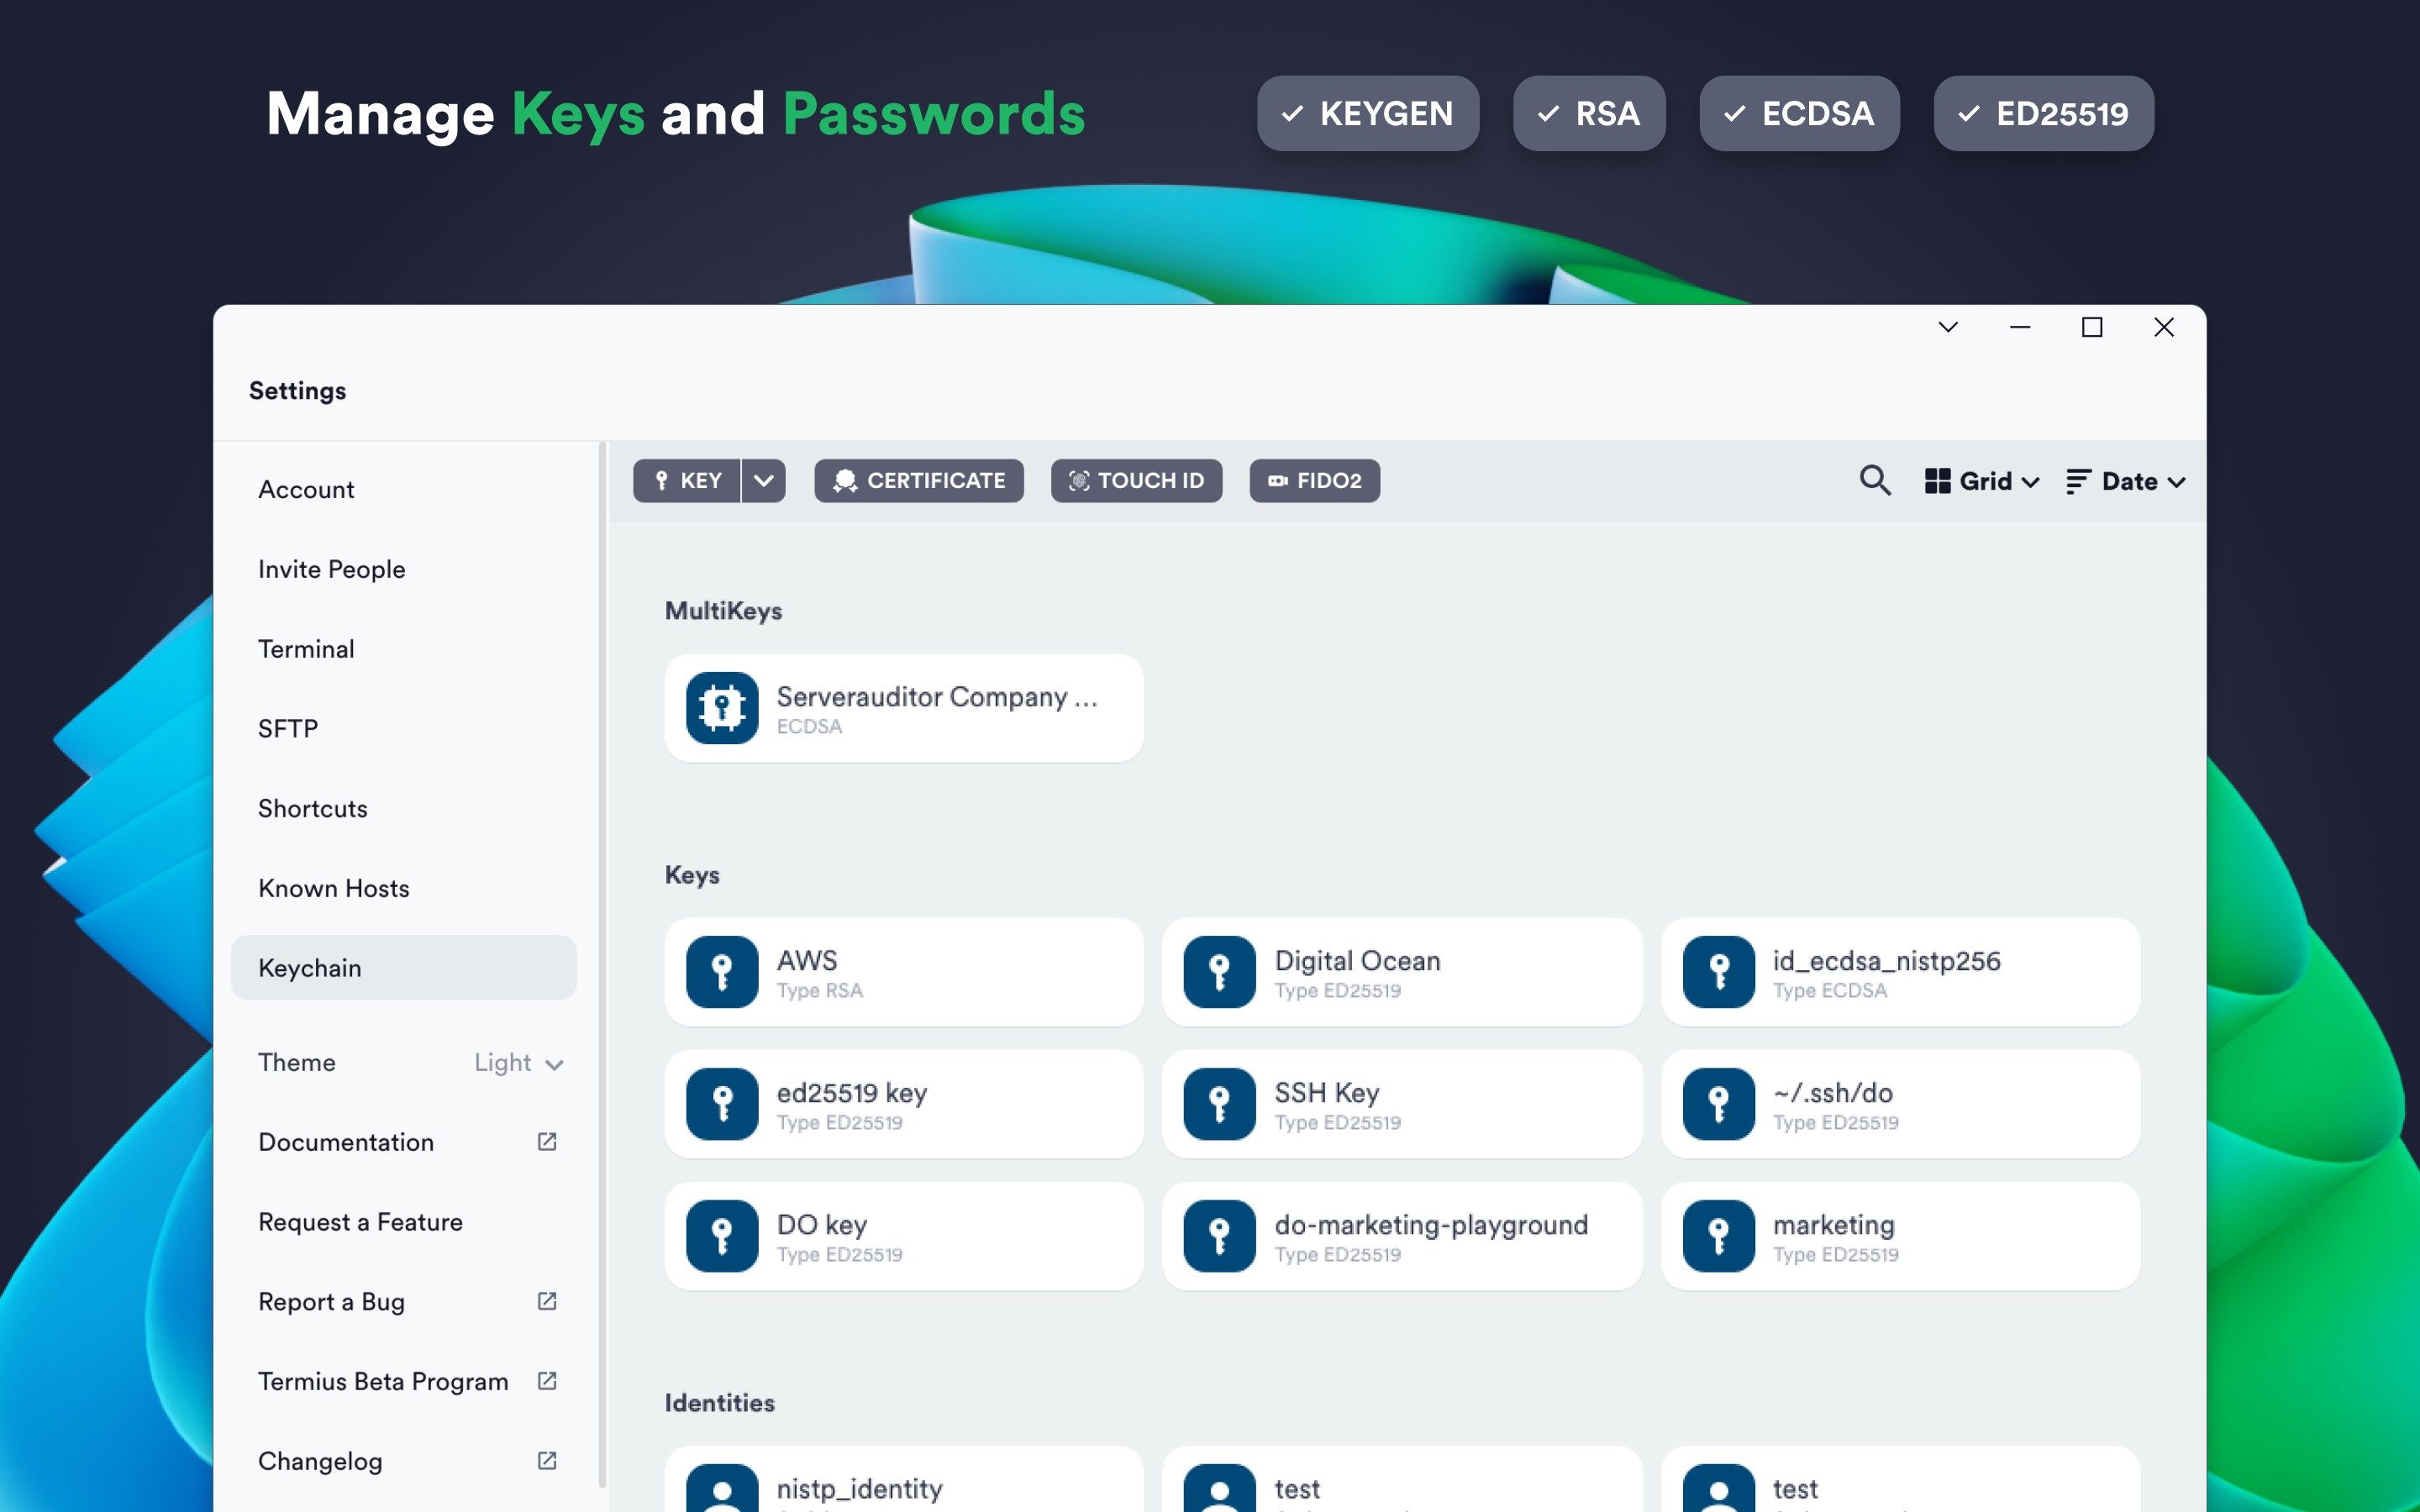 Manage Keys and Passwords